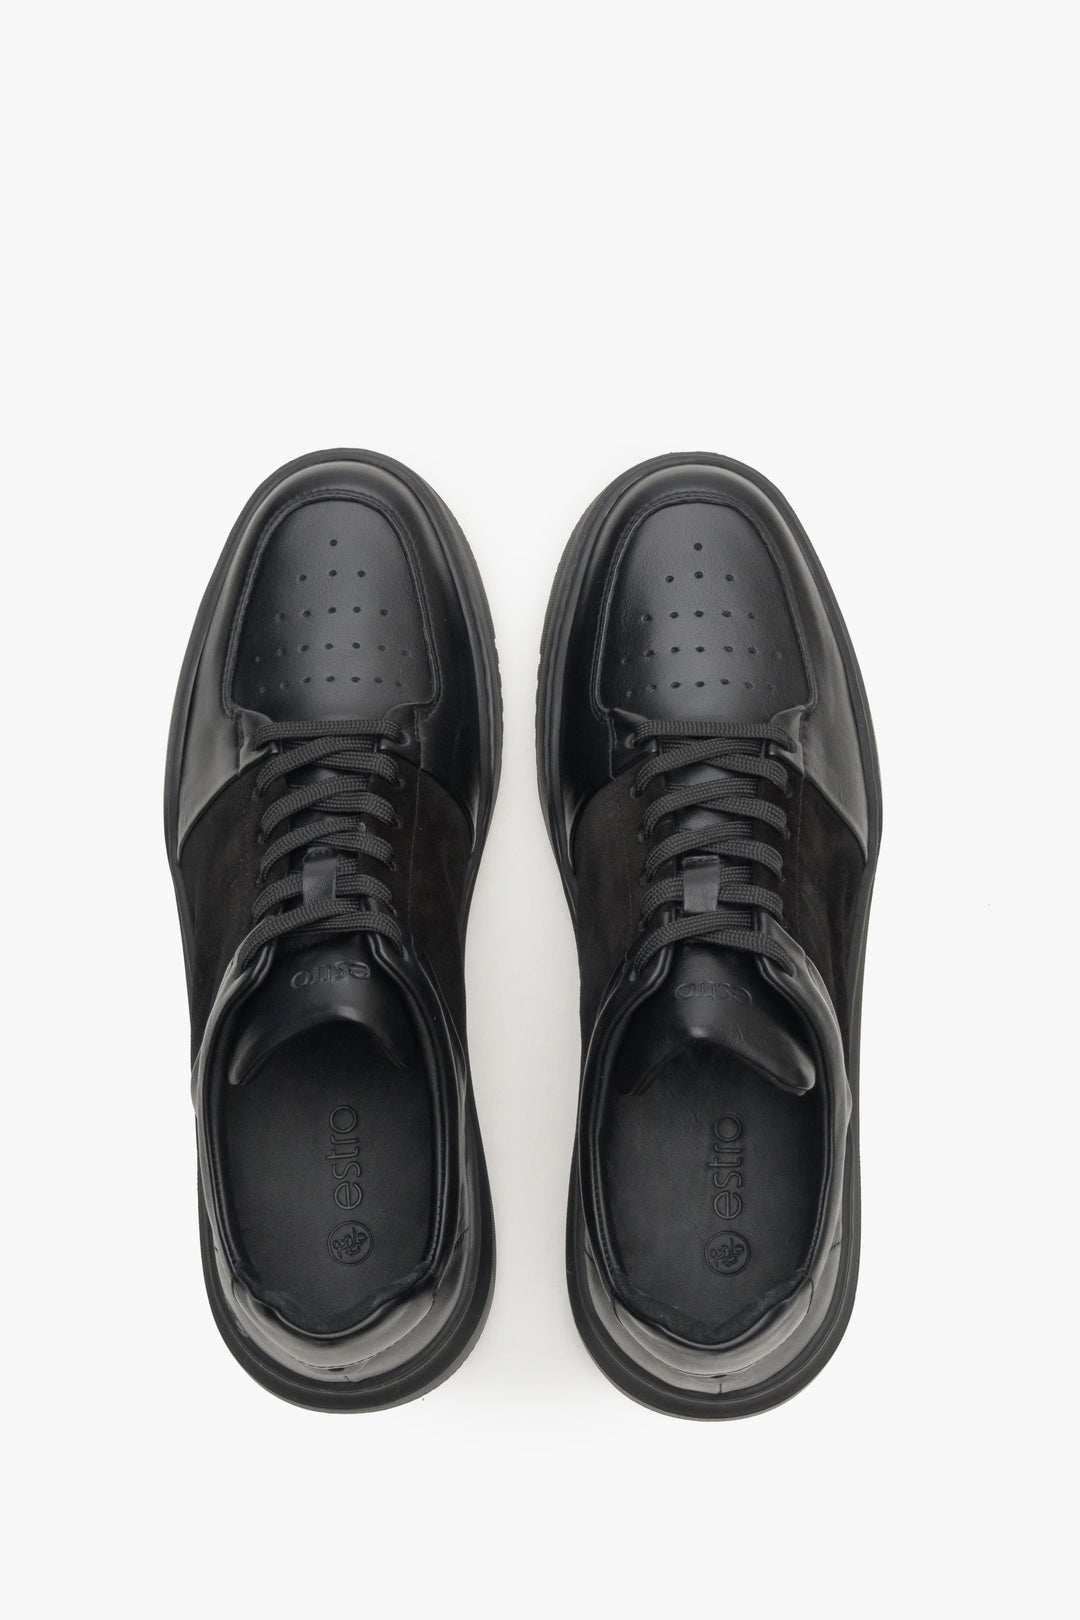 Men's black sneakers in leather and velvet by Estro - top view presentation of the model.